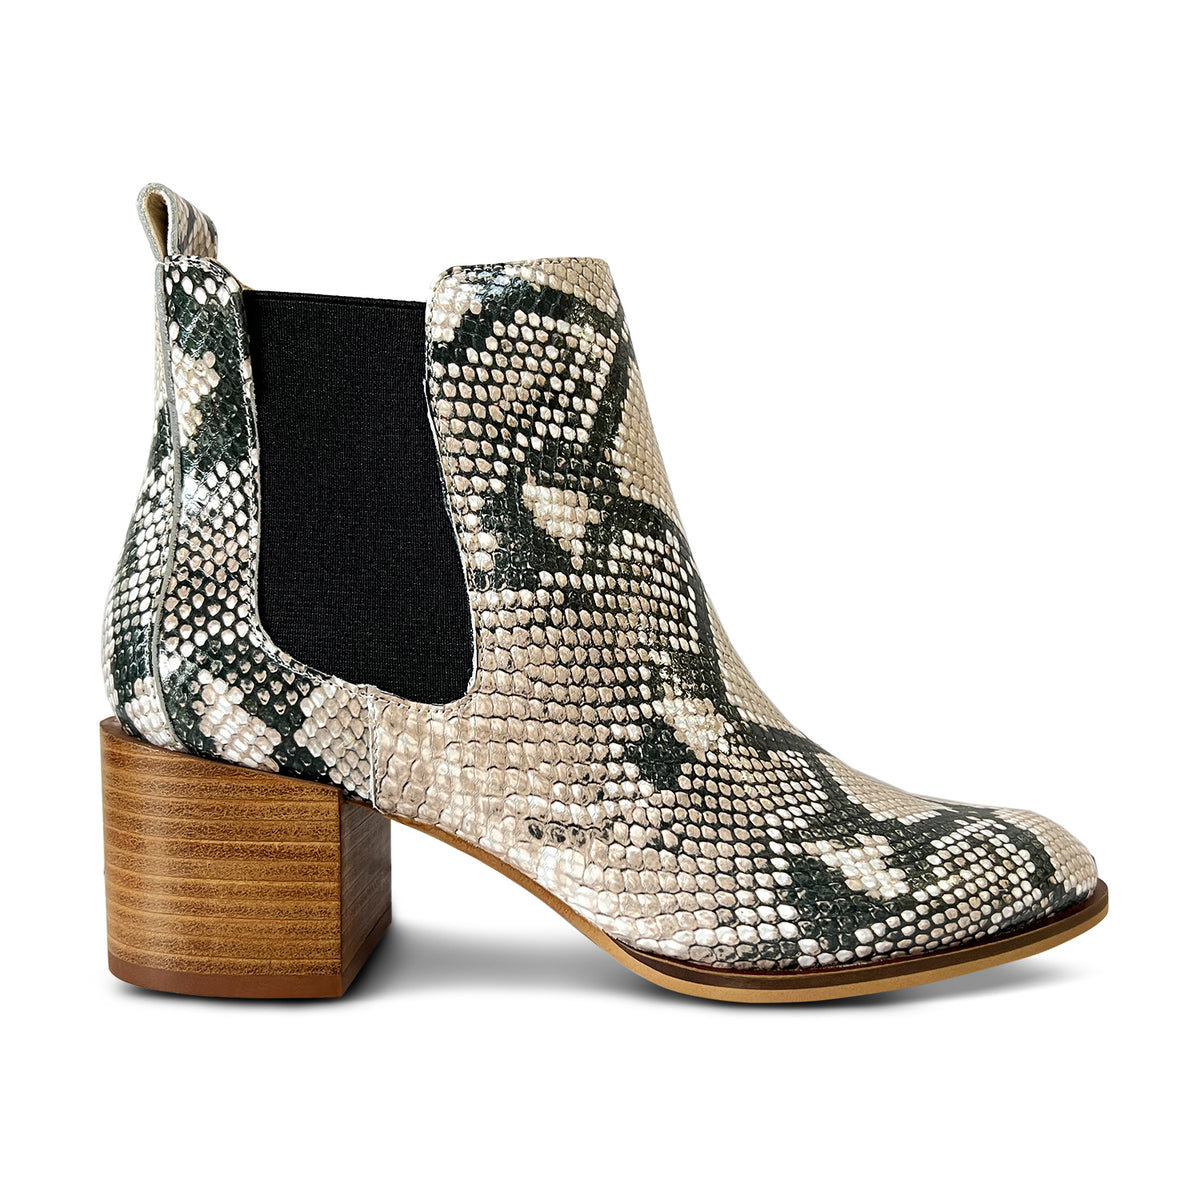 Melissa Chelsea Boot in Natural Snake Leather